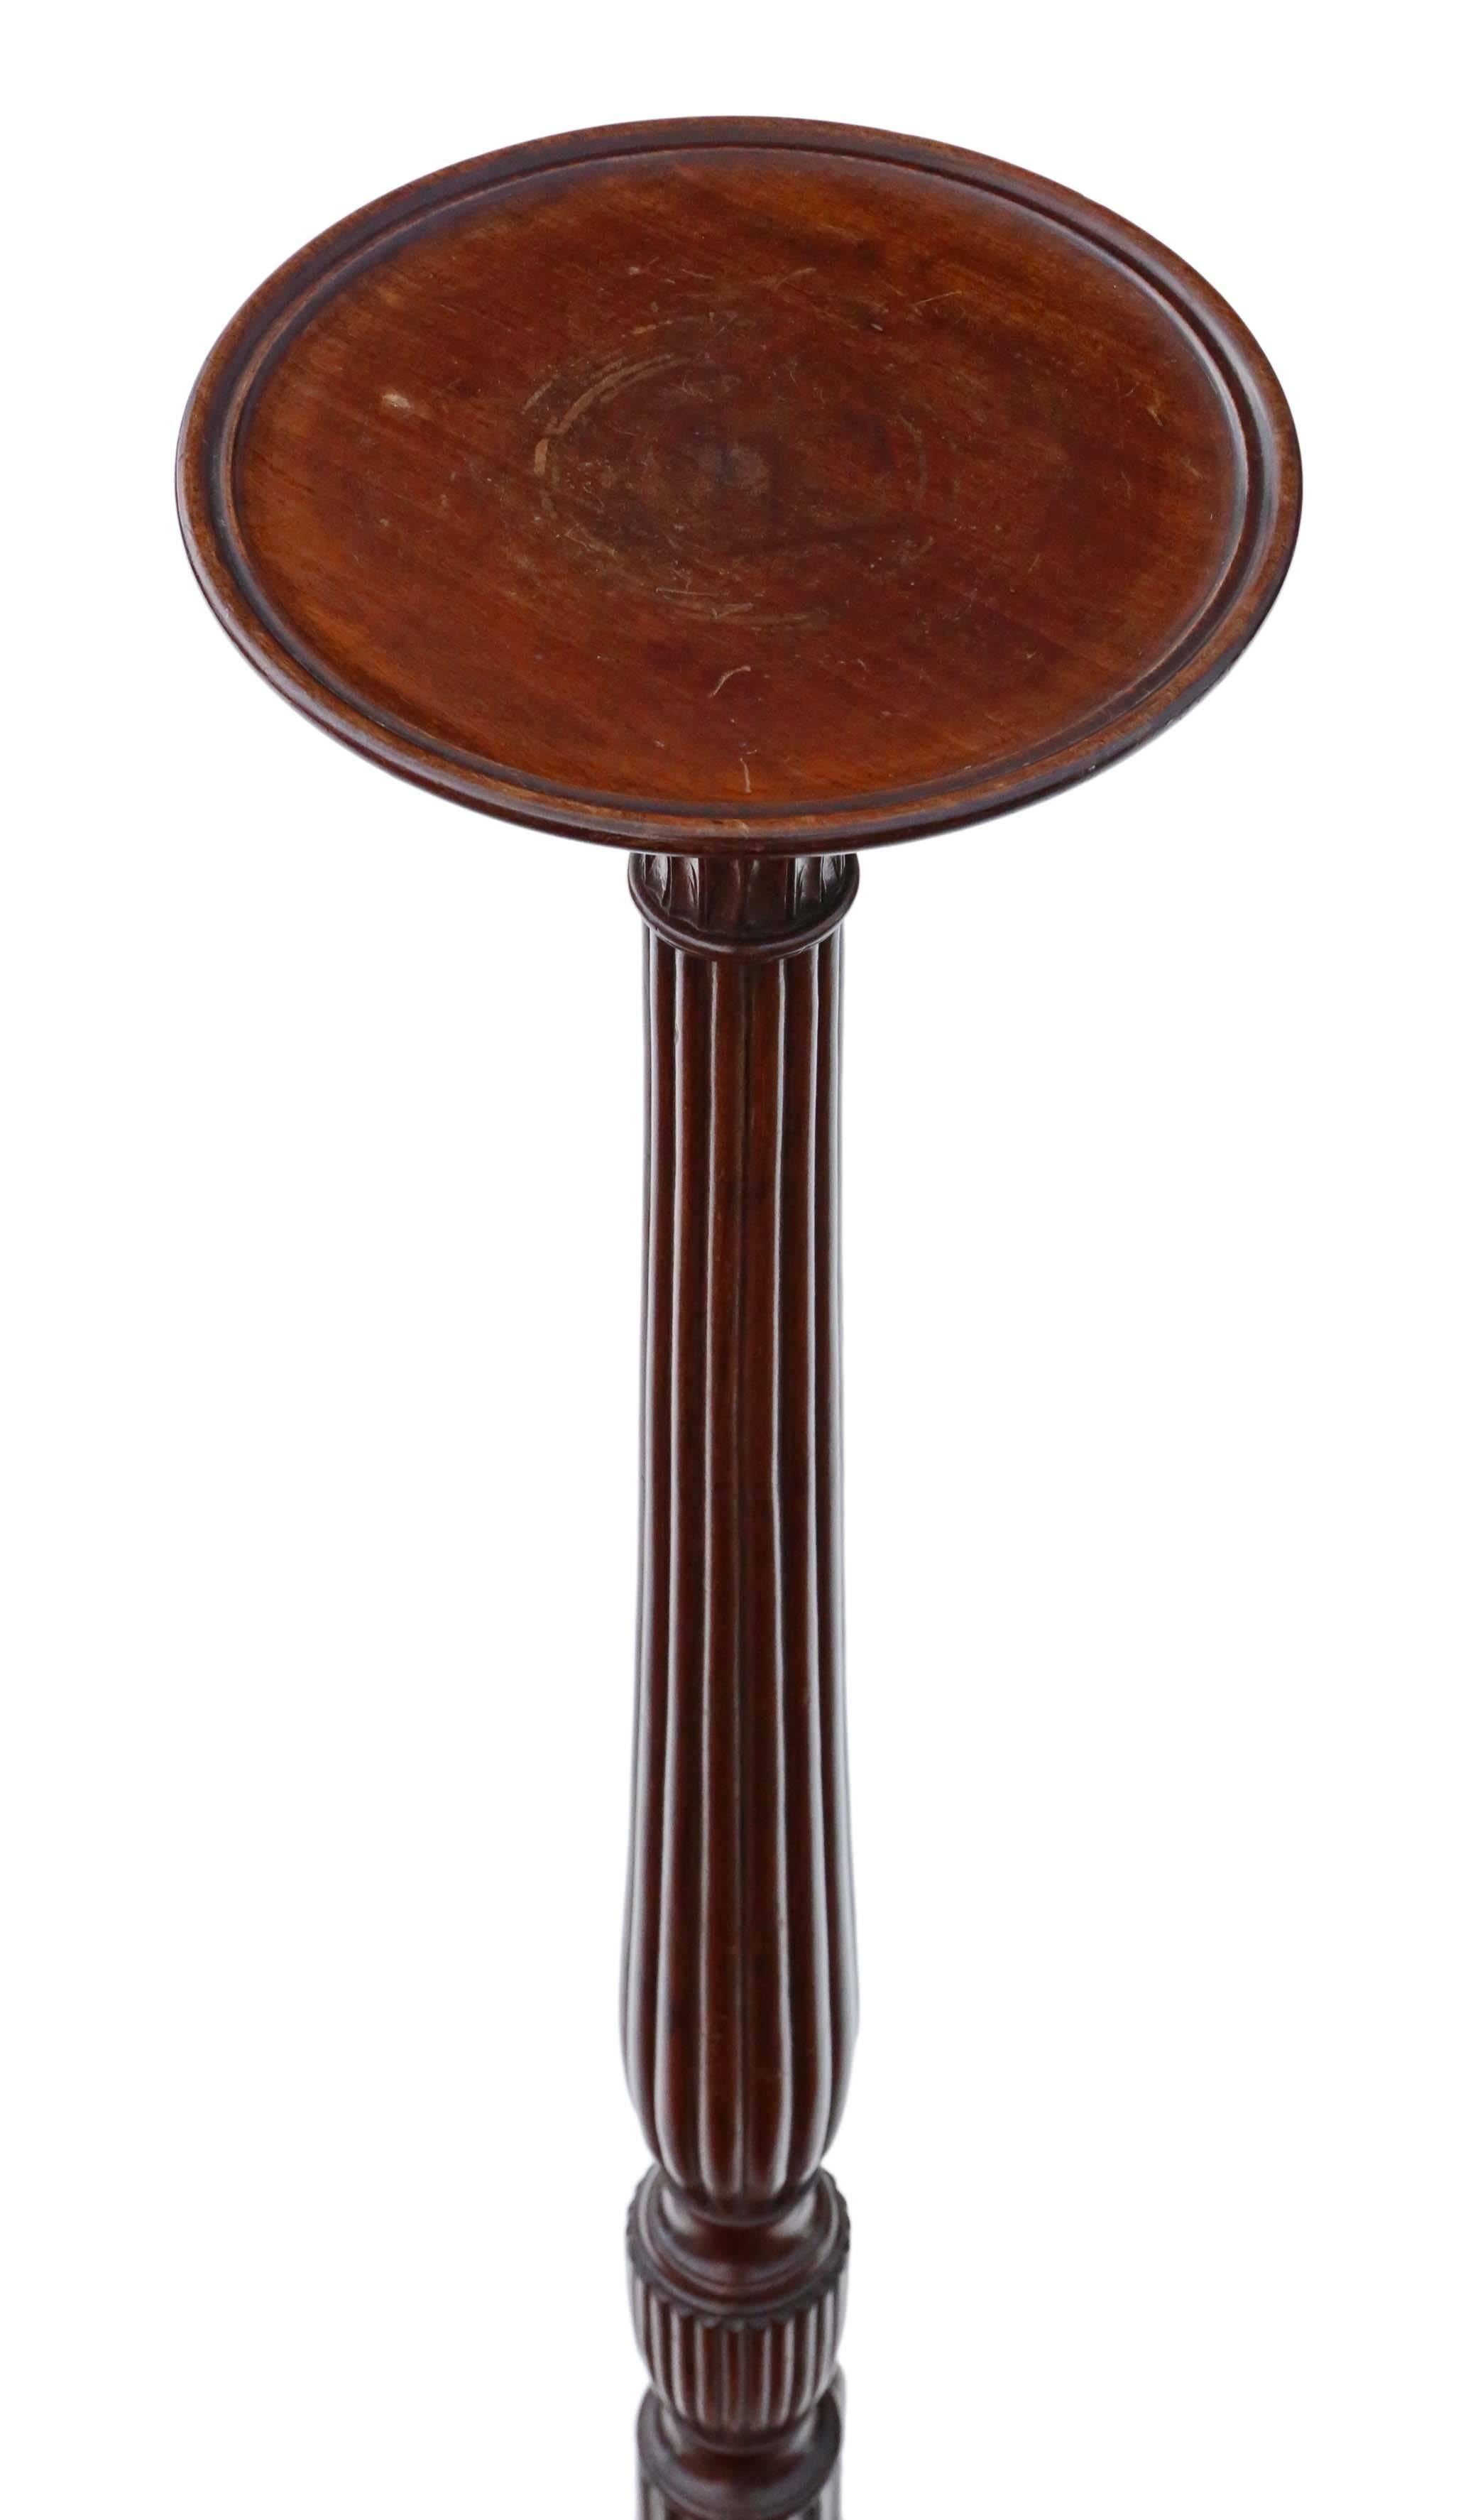 Antique early 20th century mahogany torchiere or jardinière table pedestal stand.

This item is fine quality, solid and heavy, with no loose joints. Very stable.

No woodworm.

An attractive piece with a lovely fluted stem and a quality